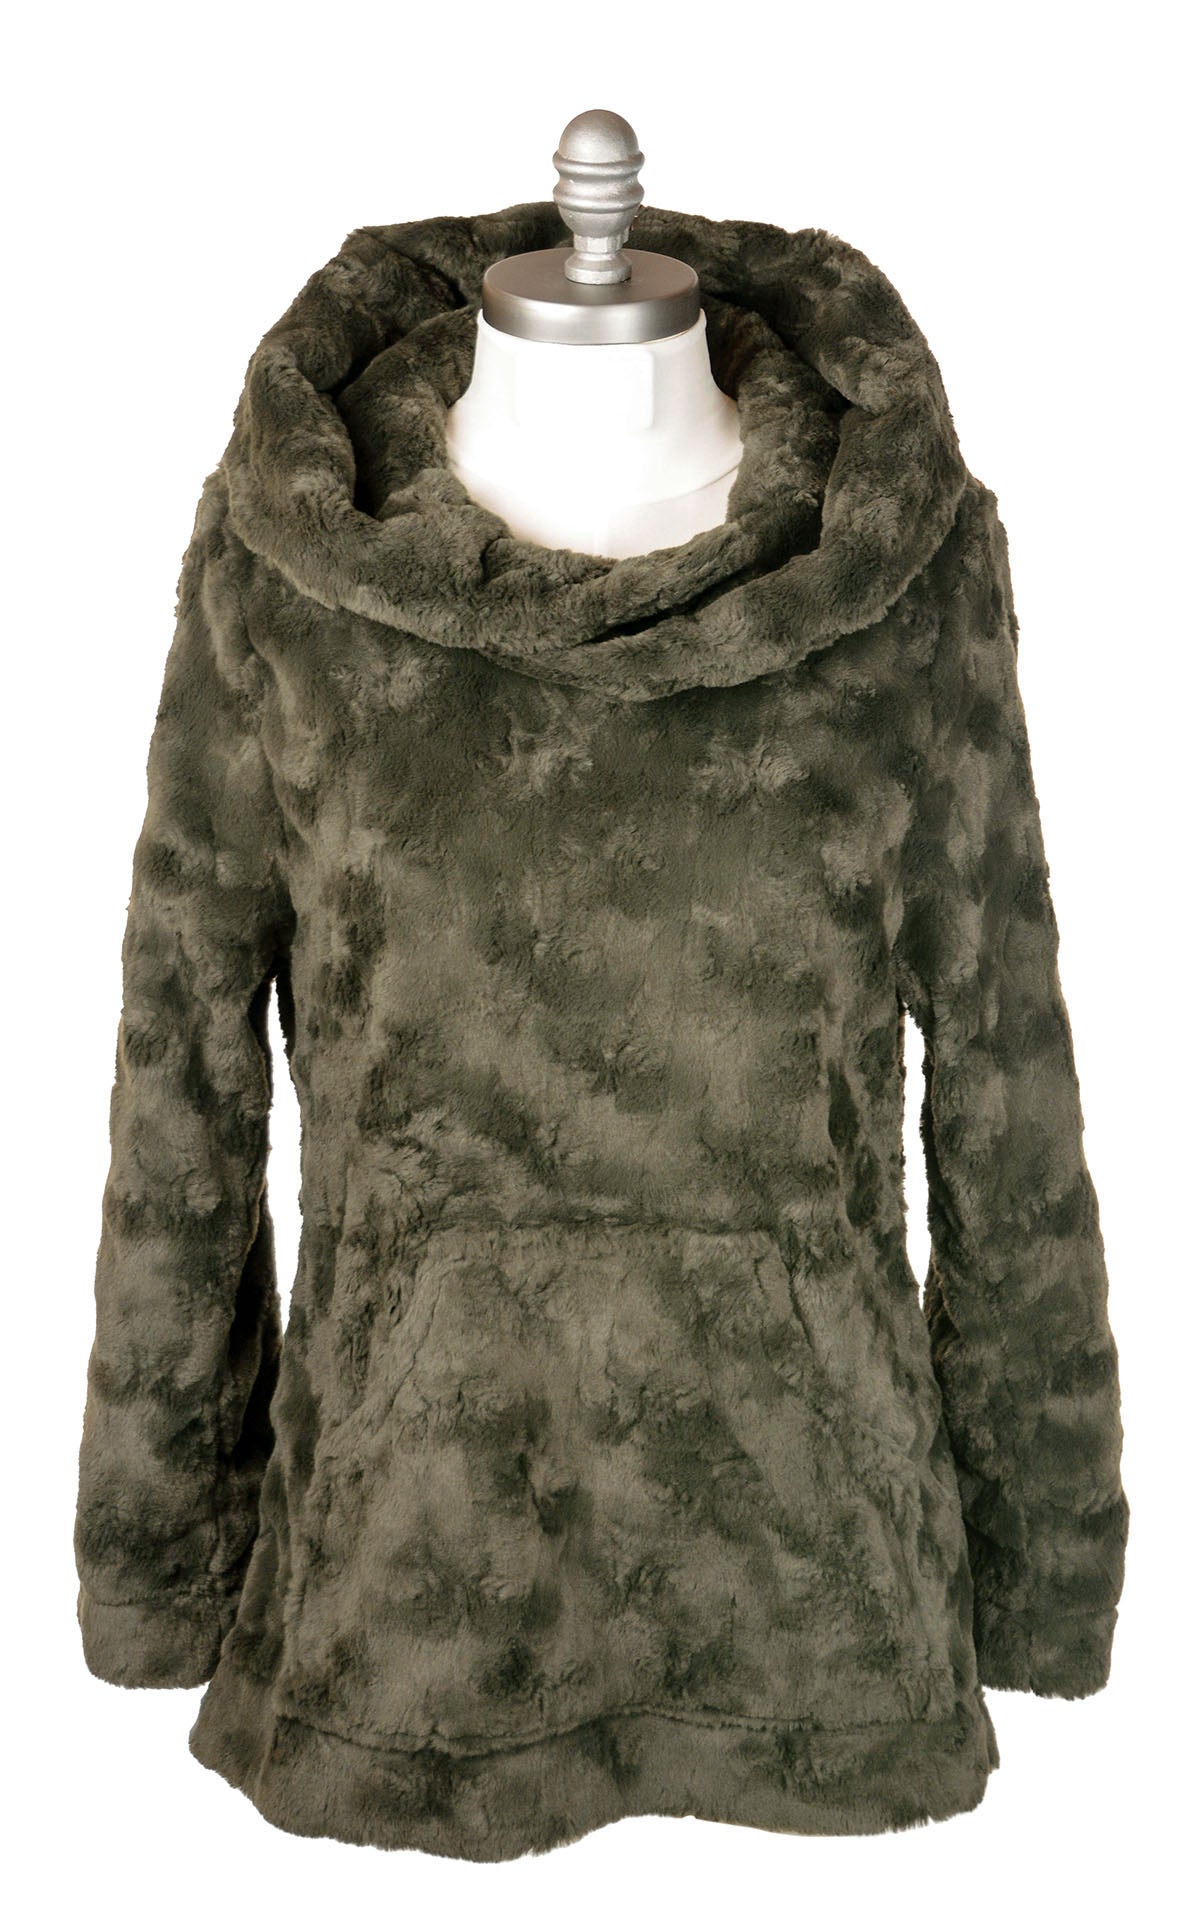 Hooded Lounger Cuddly Faux Fur in Army Green | Handmade in Seattle WA USA | Pandemonium Millinery